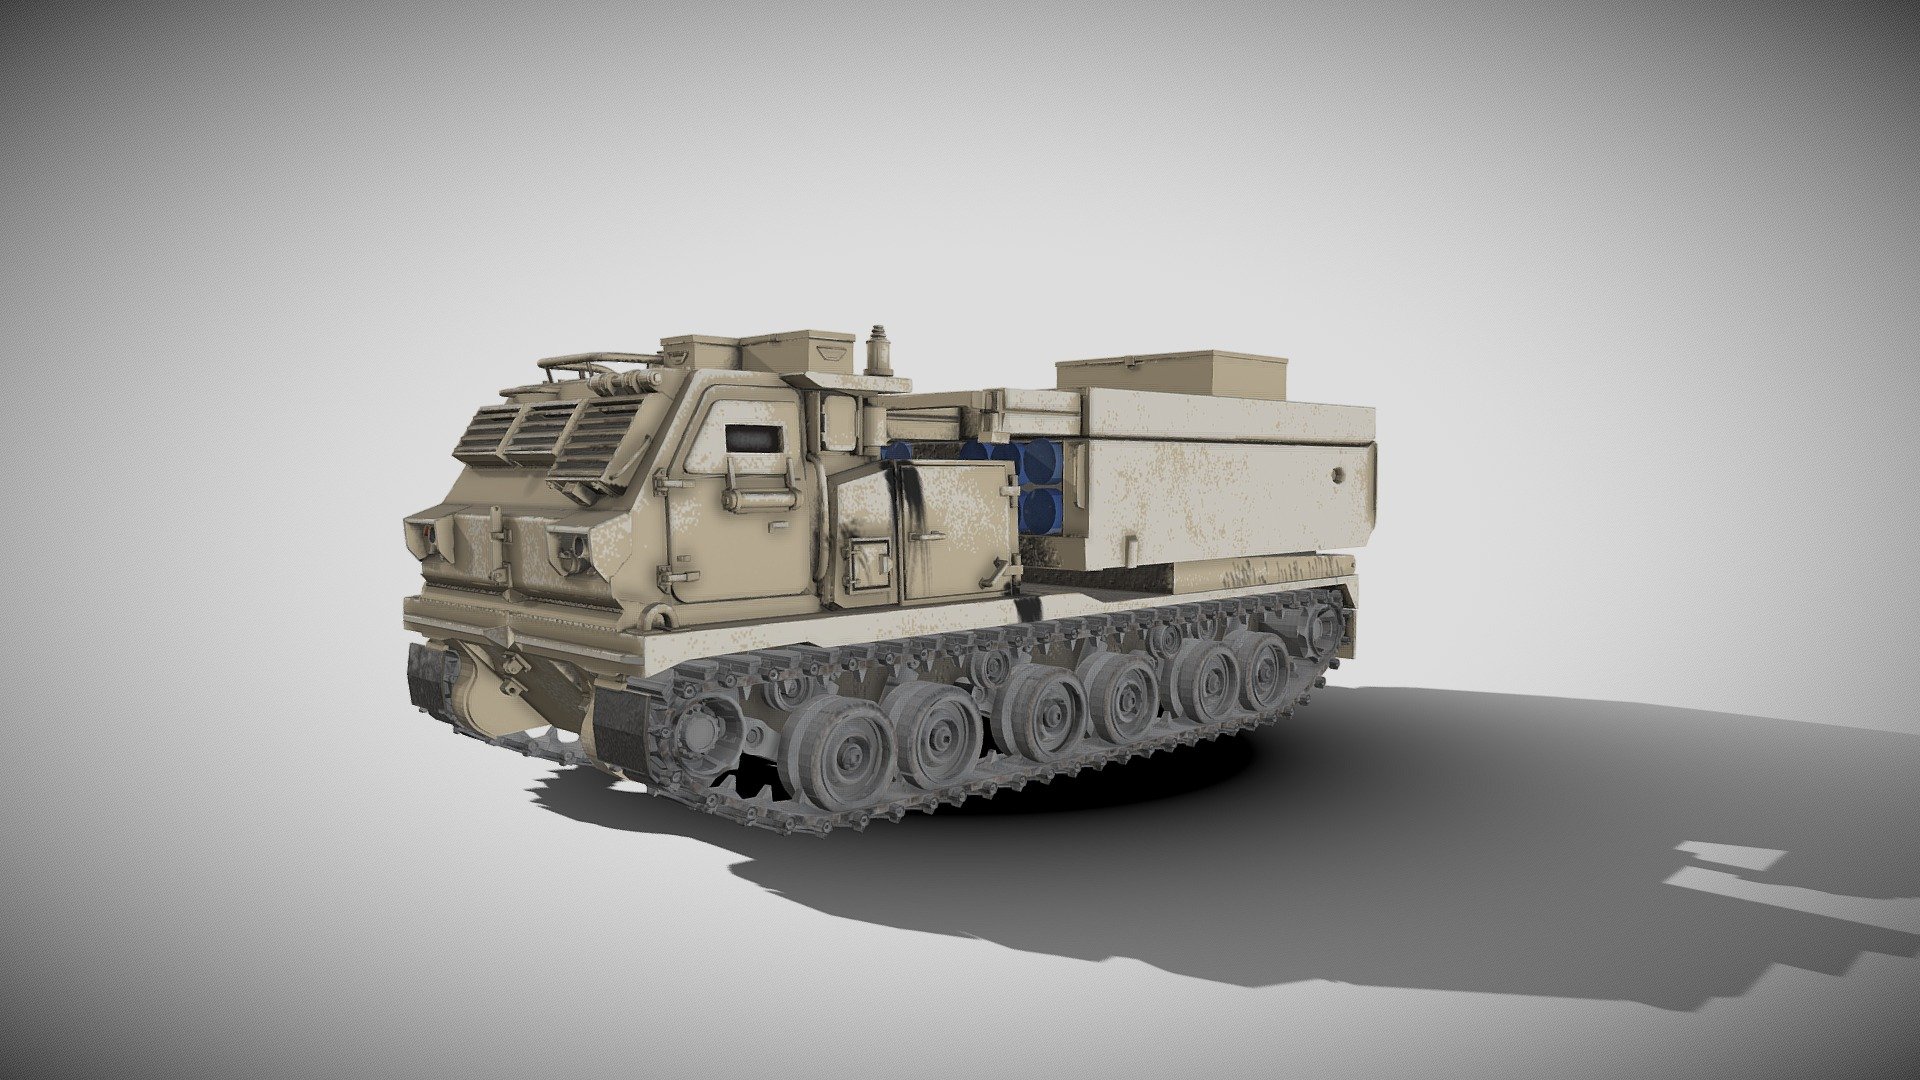 M270 MLRS painted and textured as in the IDF.
Model can be downloaded at: https://bit.ly/3Lkwl2t - Israeli Defence Forces M270 MLRS 3D model - 3D model by Amit.Rotem 3d model